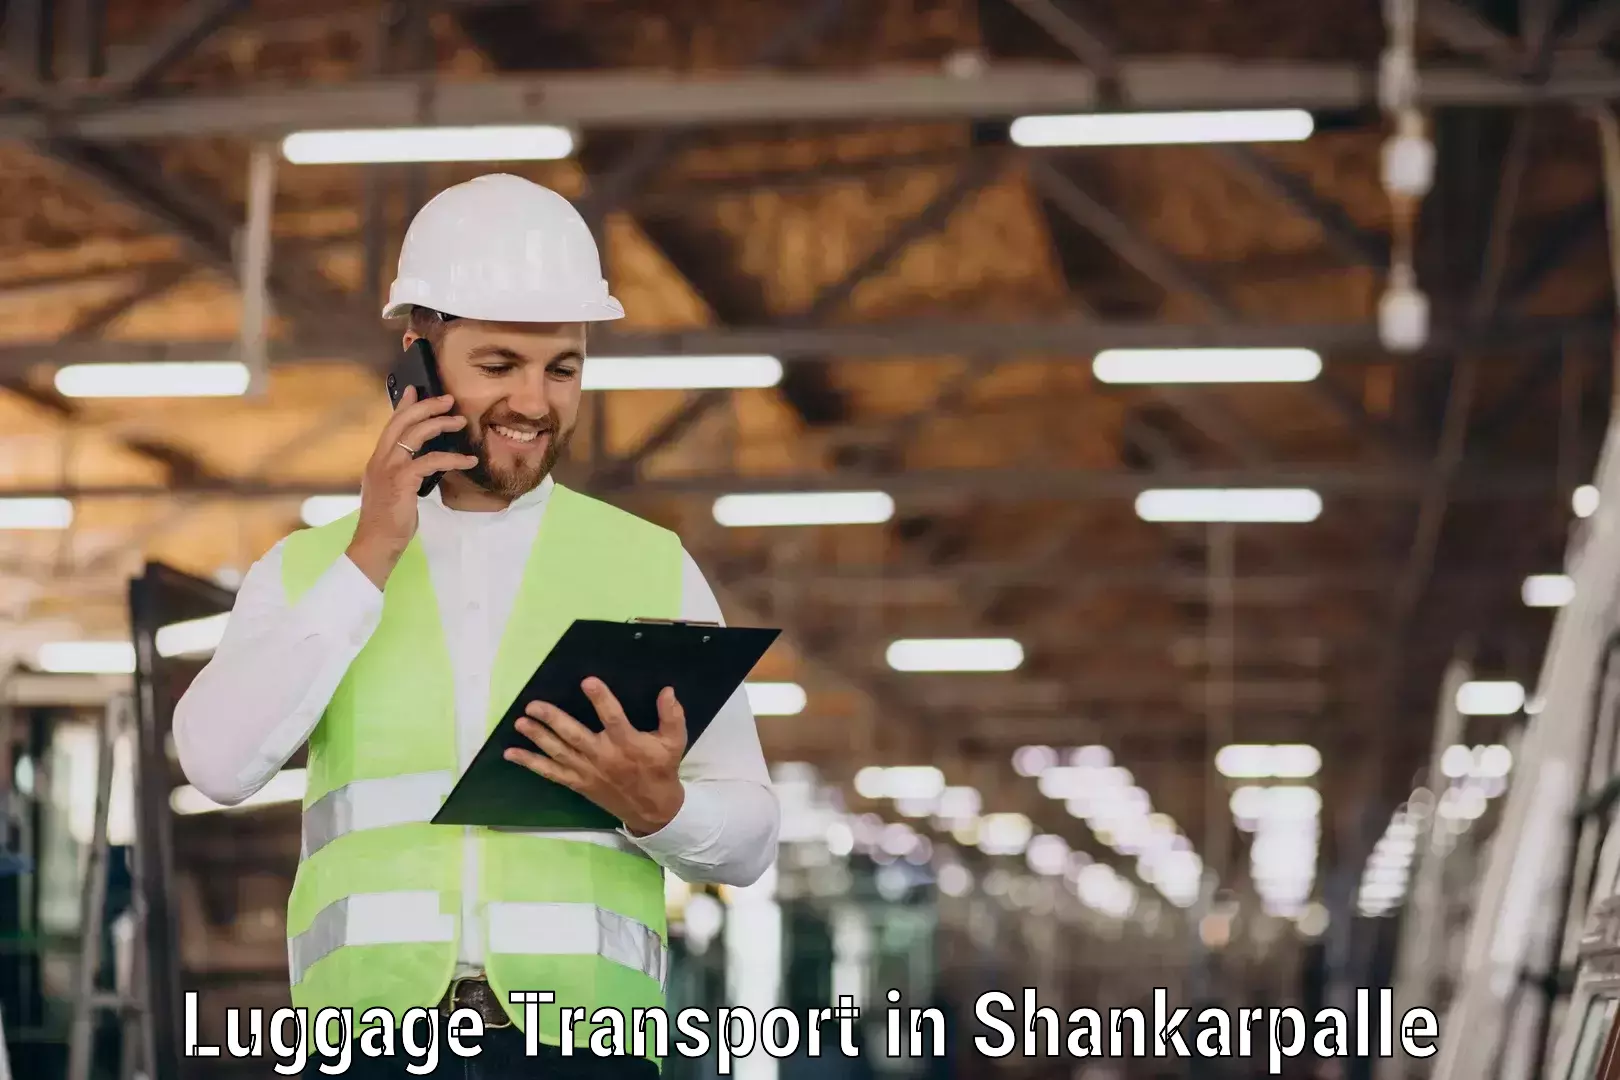 Luggage forwarding service in Shankarpalle